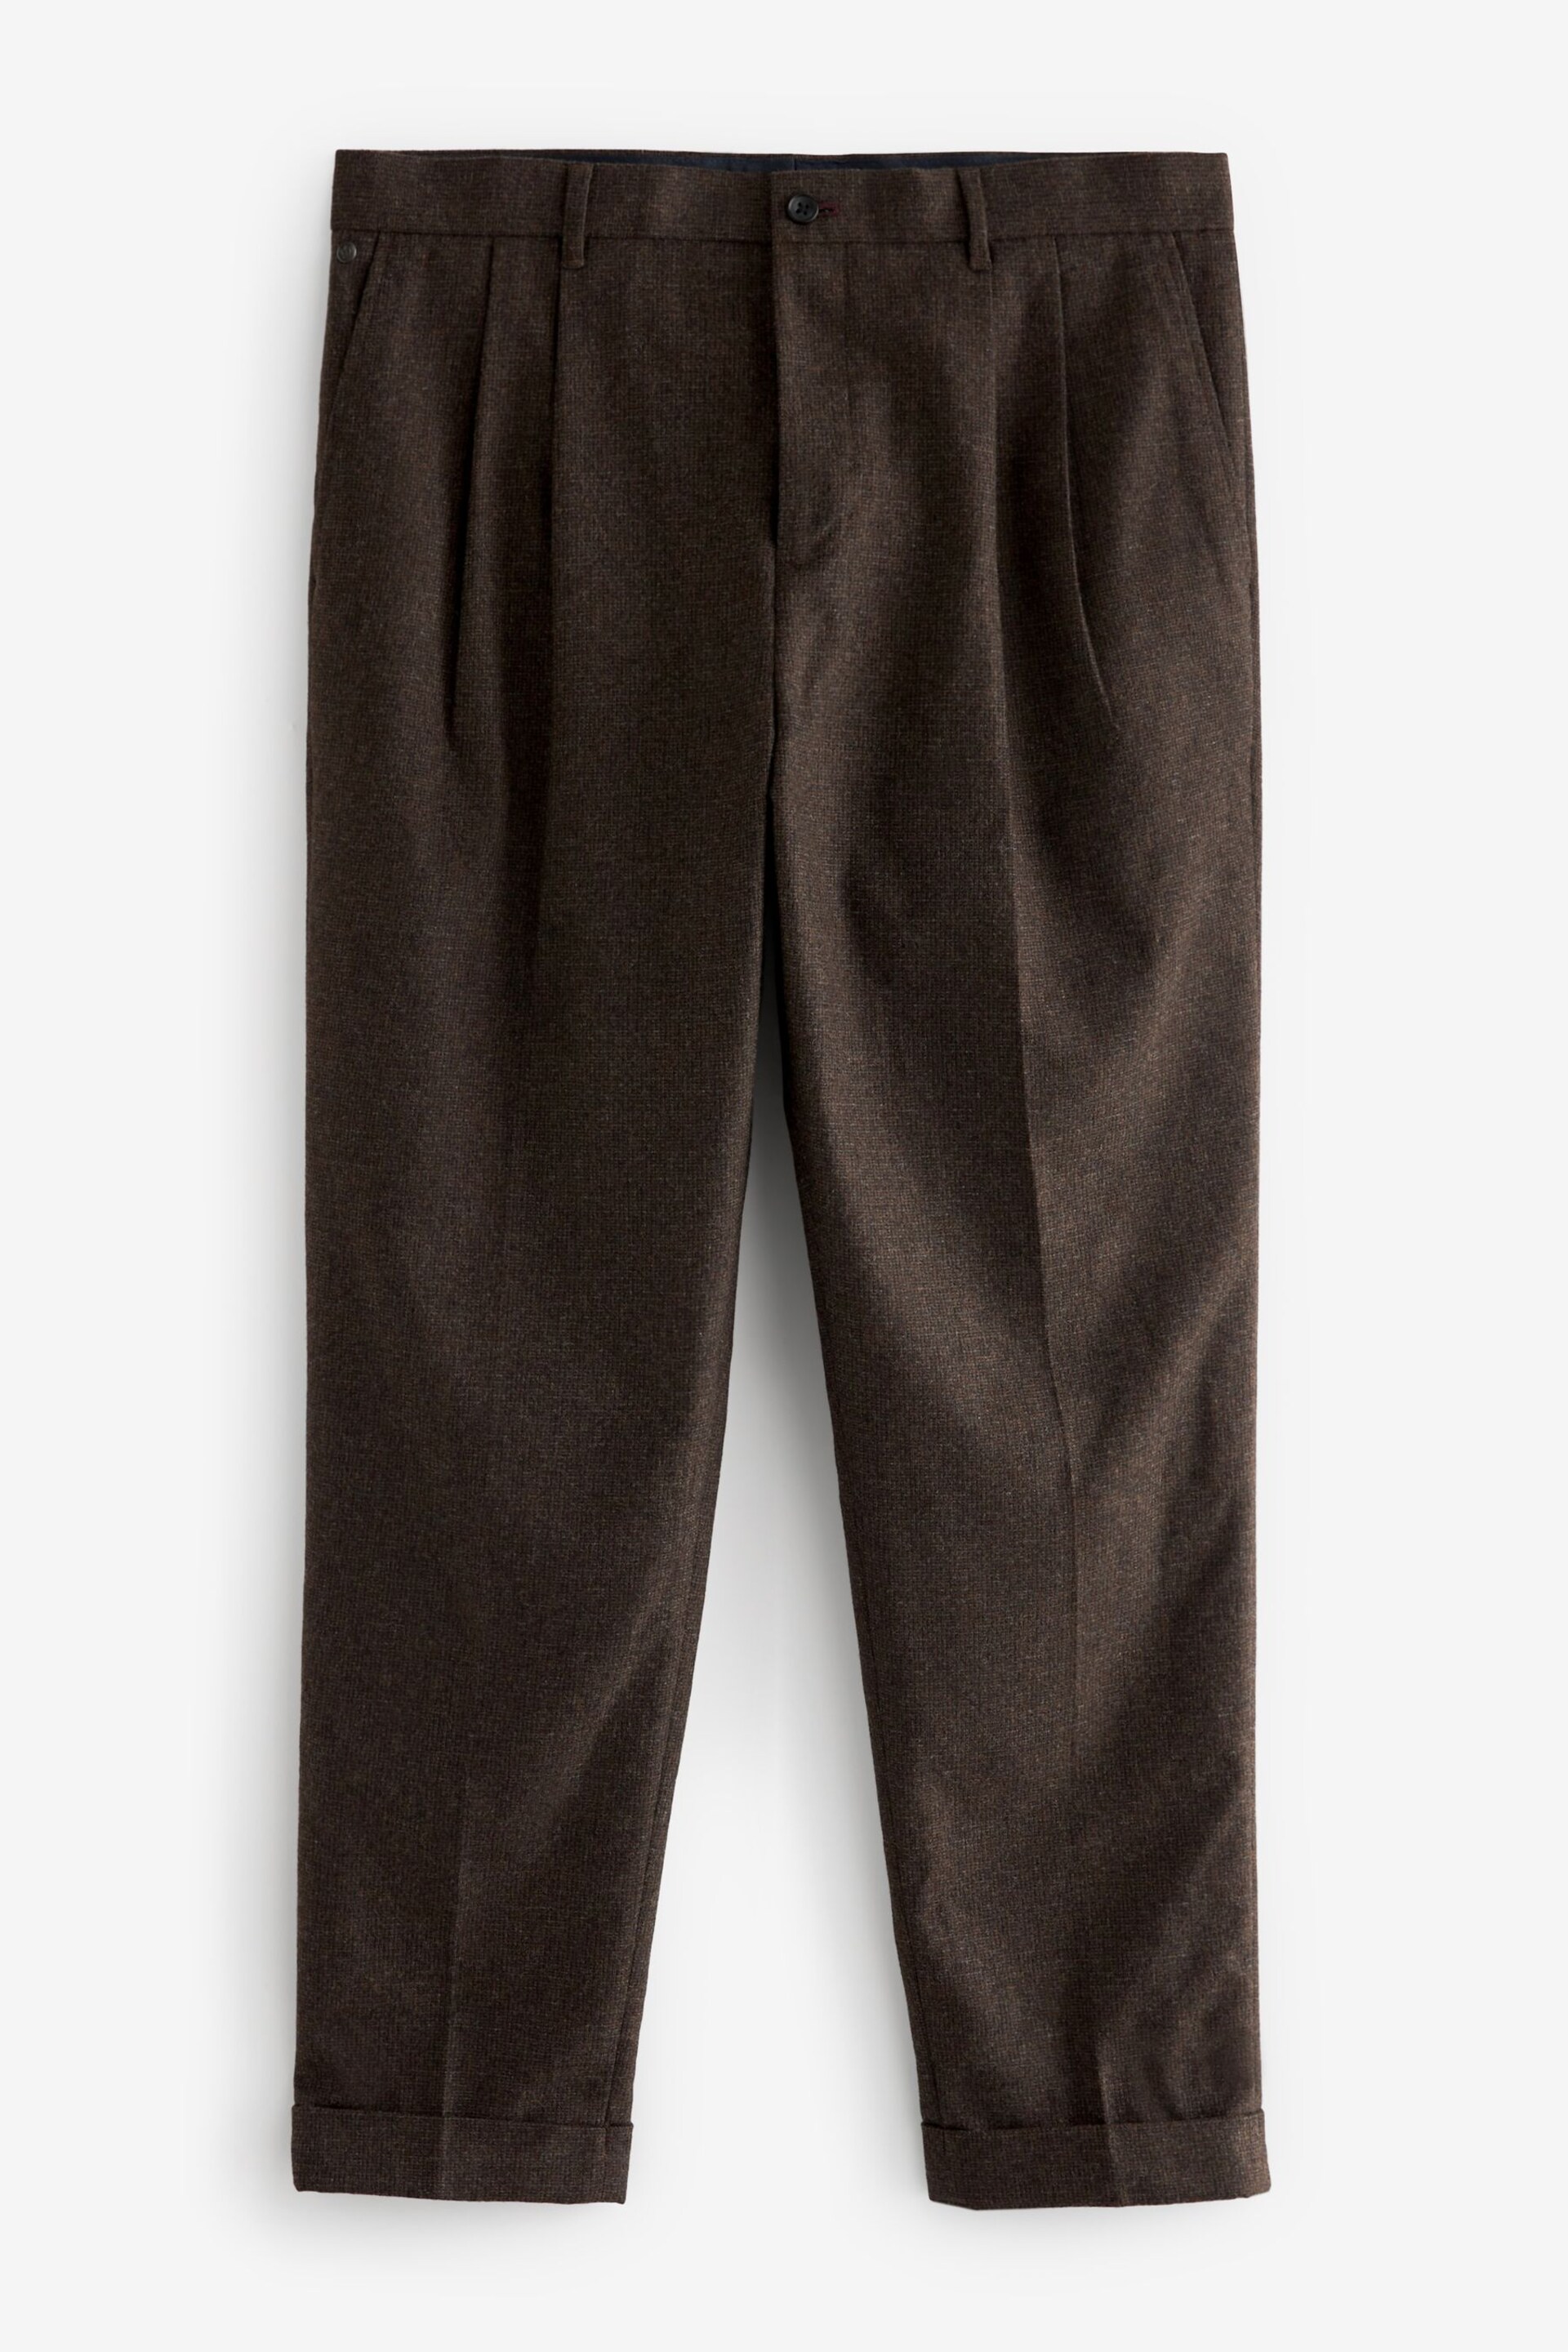 Textured Brown Nova Fides Italian Fabric Trousers With Wool - Image 5 of 8